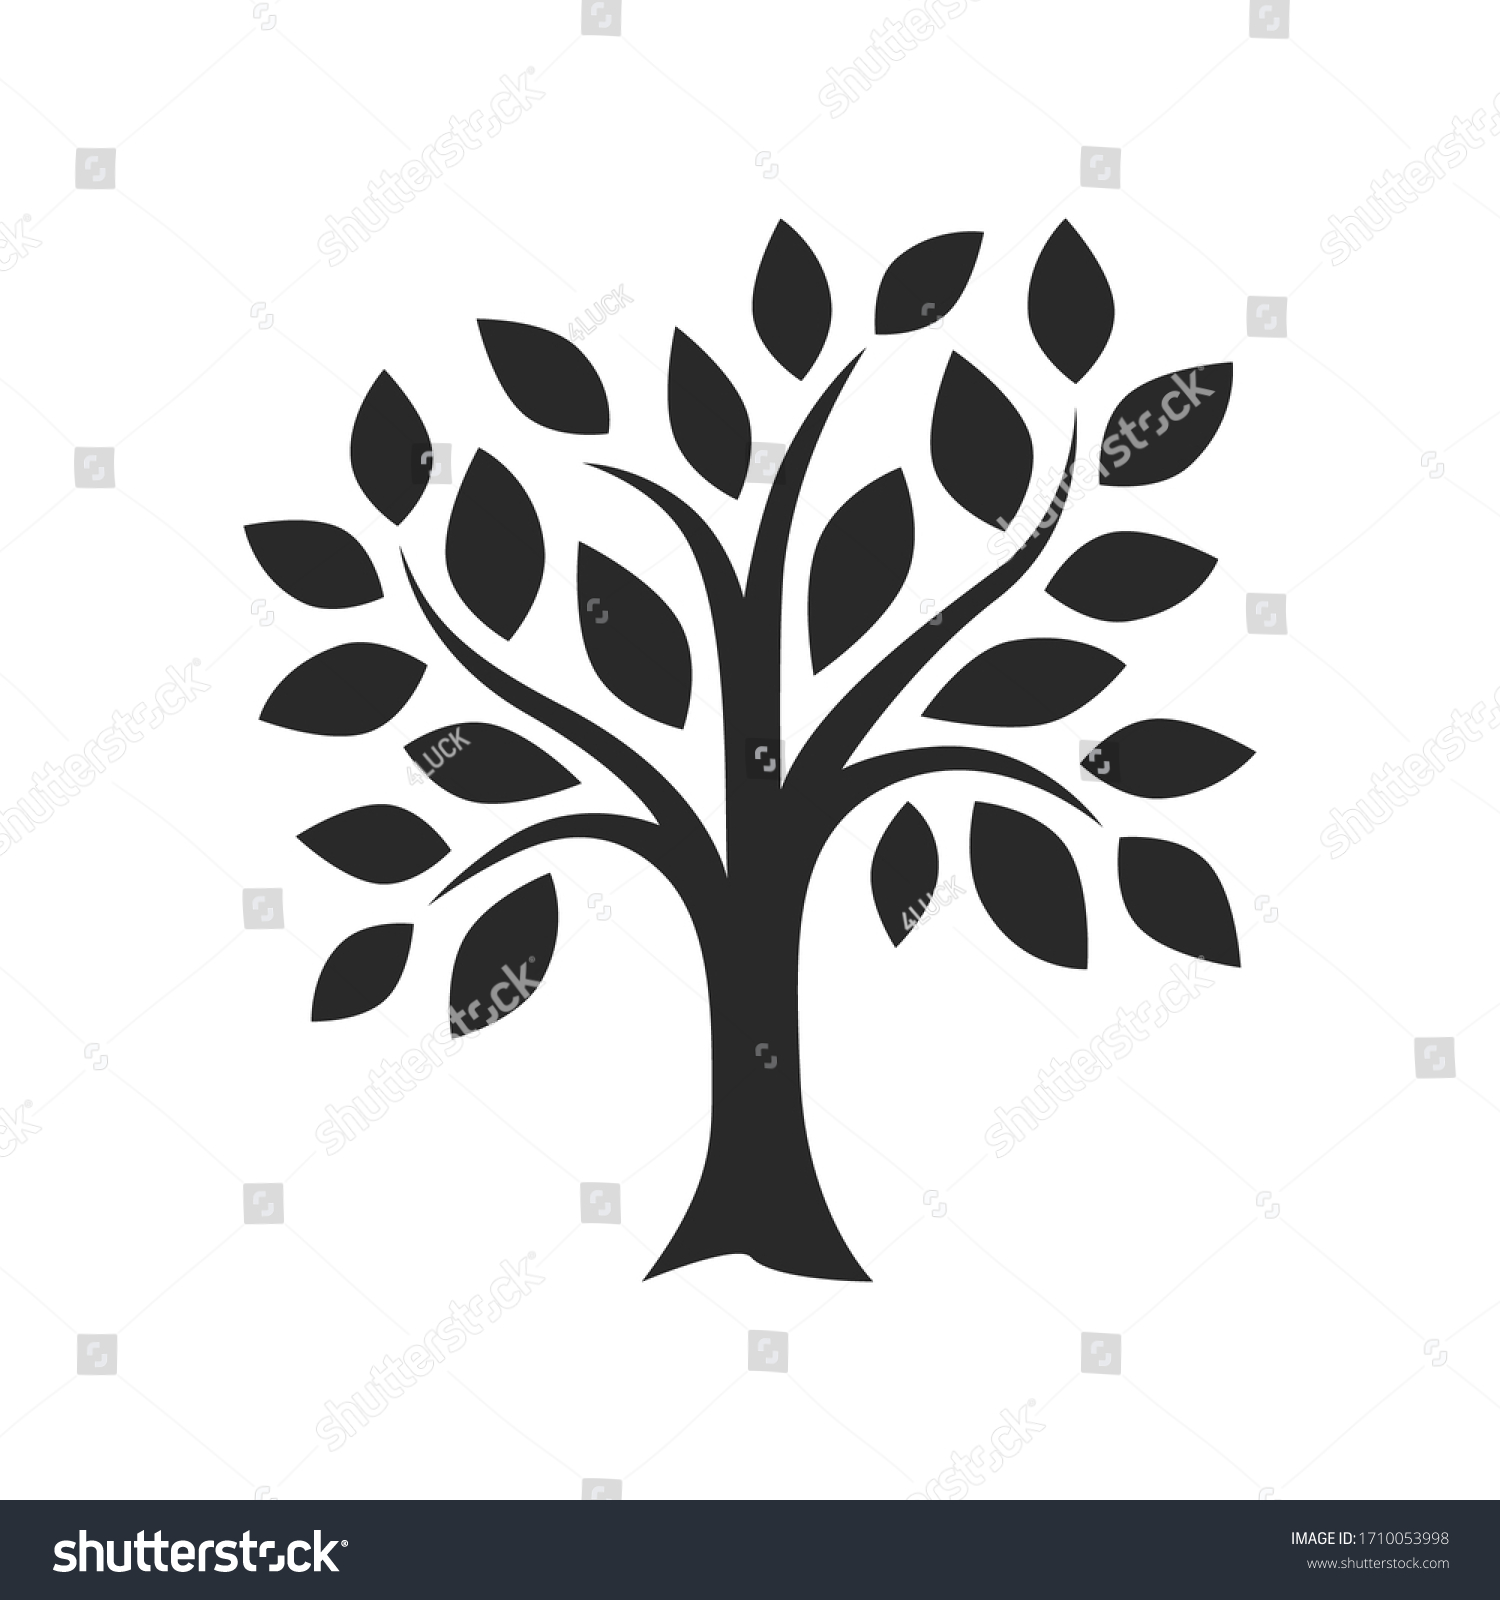 SVG of simple tree decor silhouette vector image svg